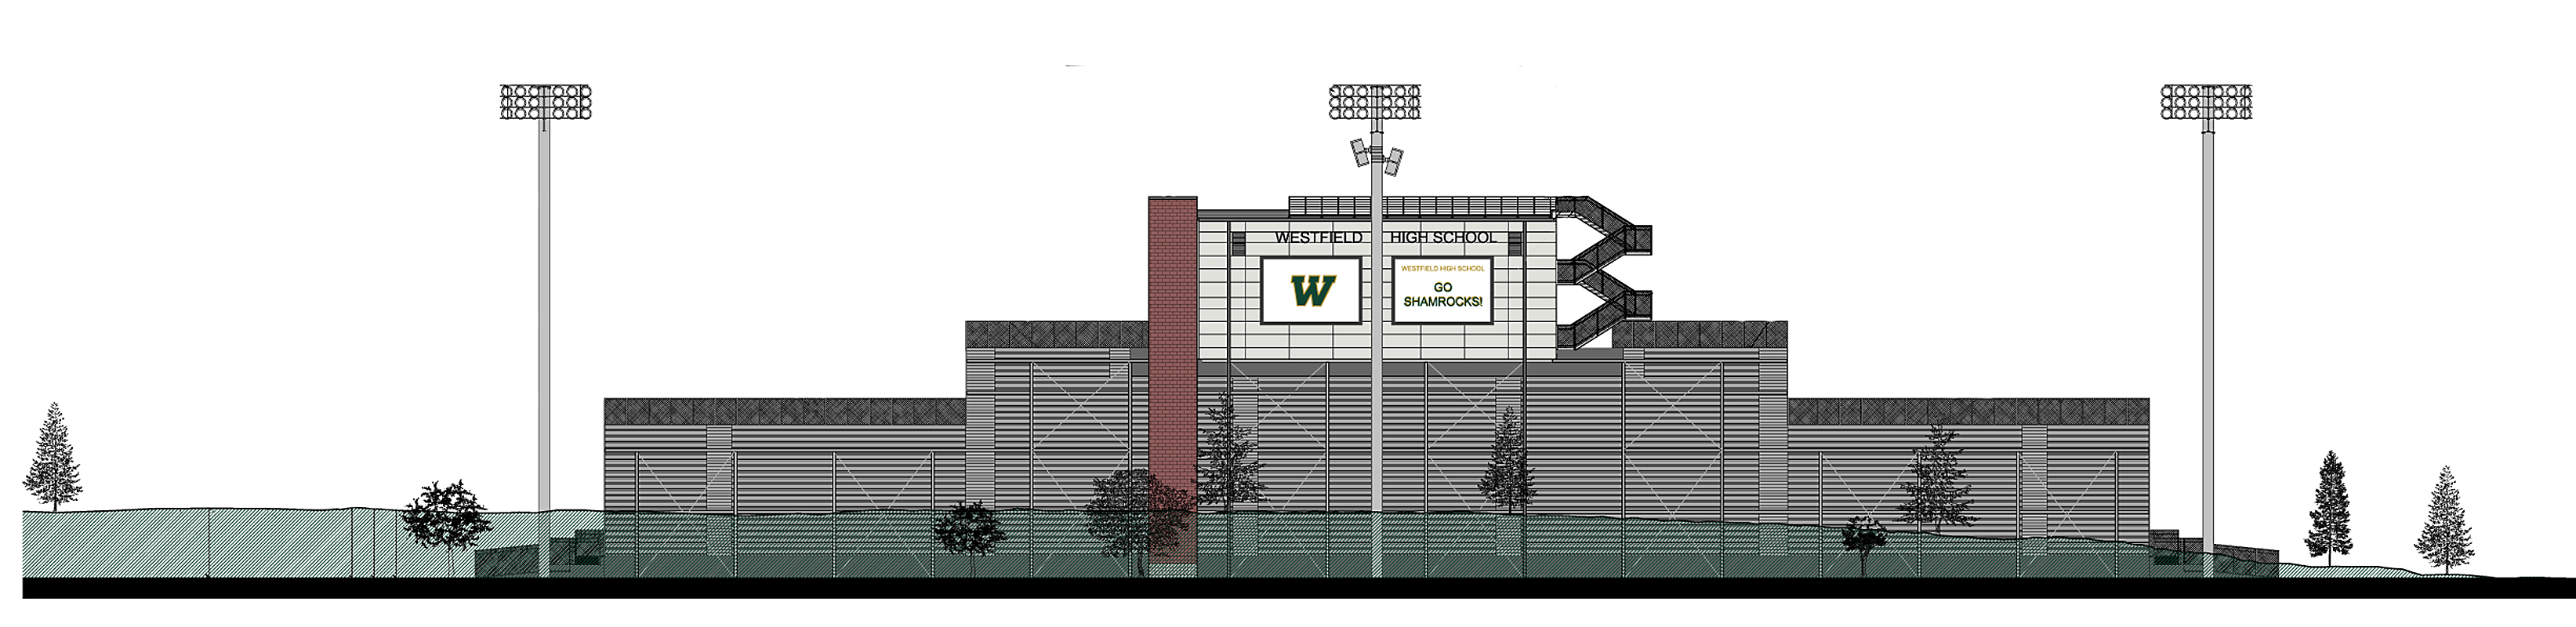 Original development plans have six foot fencing and columns around the entire stadium along with other landscaping but city ordinances may require a brick wall to hide bleacher seats from U.S. 31. (Submitted rendering)